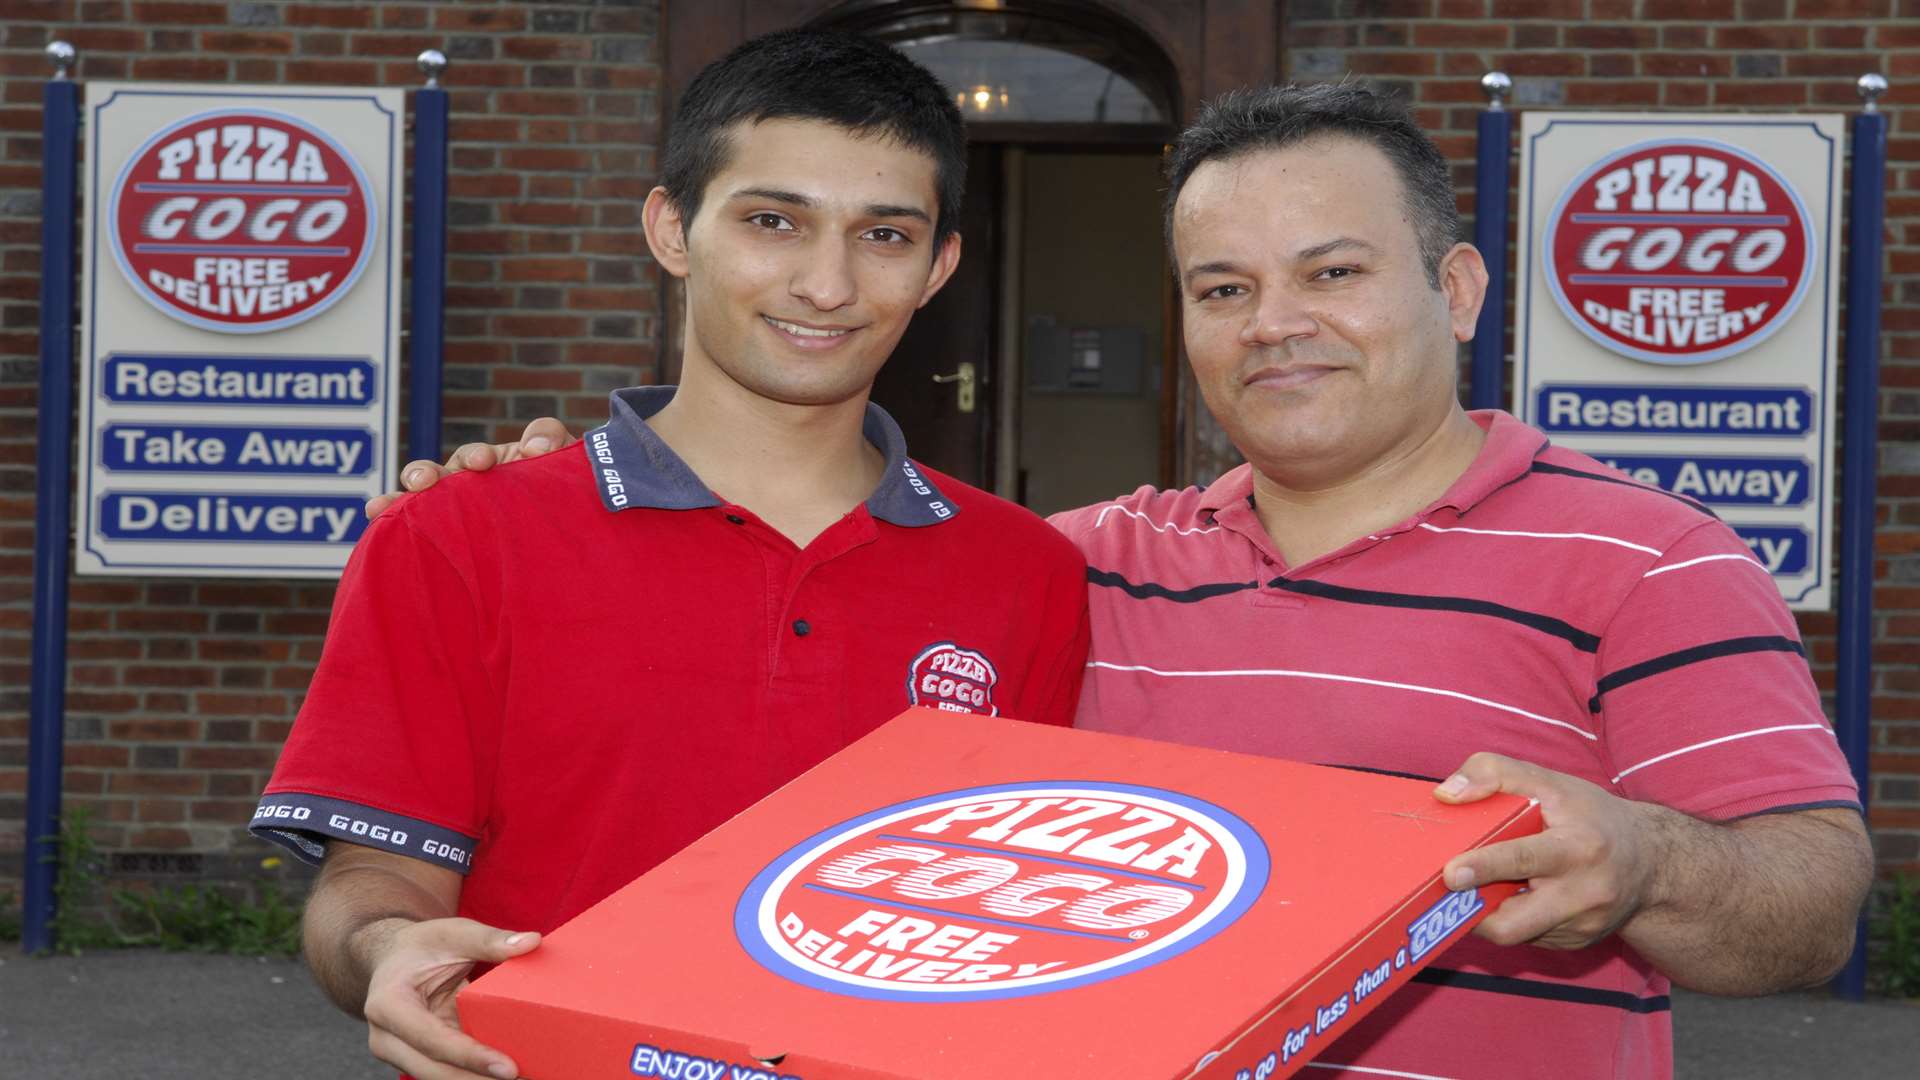 Mohammad Gholami and his father, franchisee Mansour Gholami